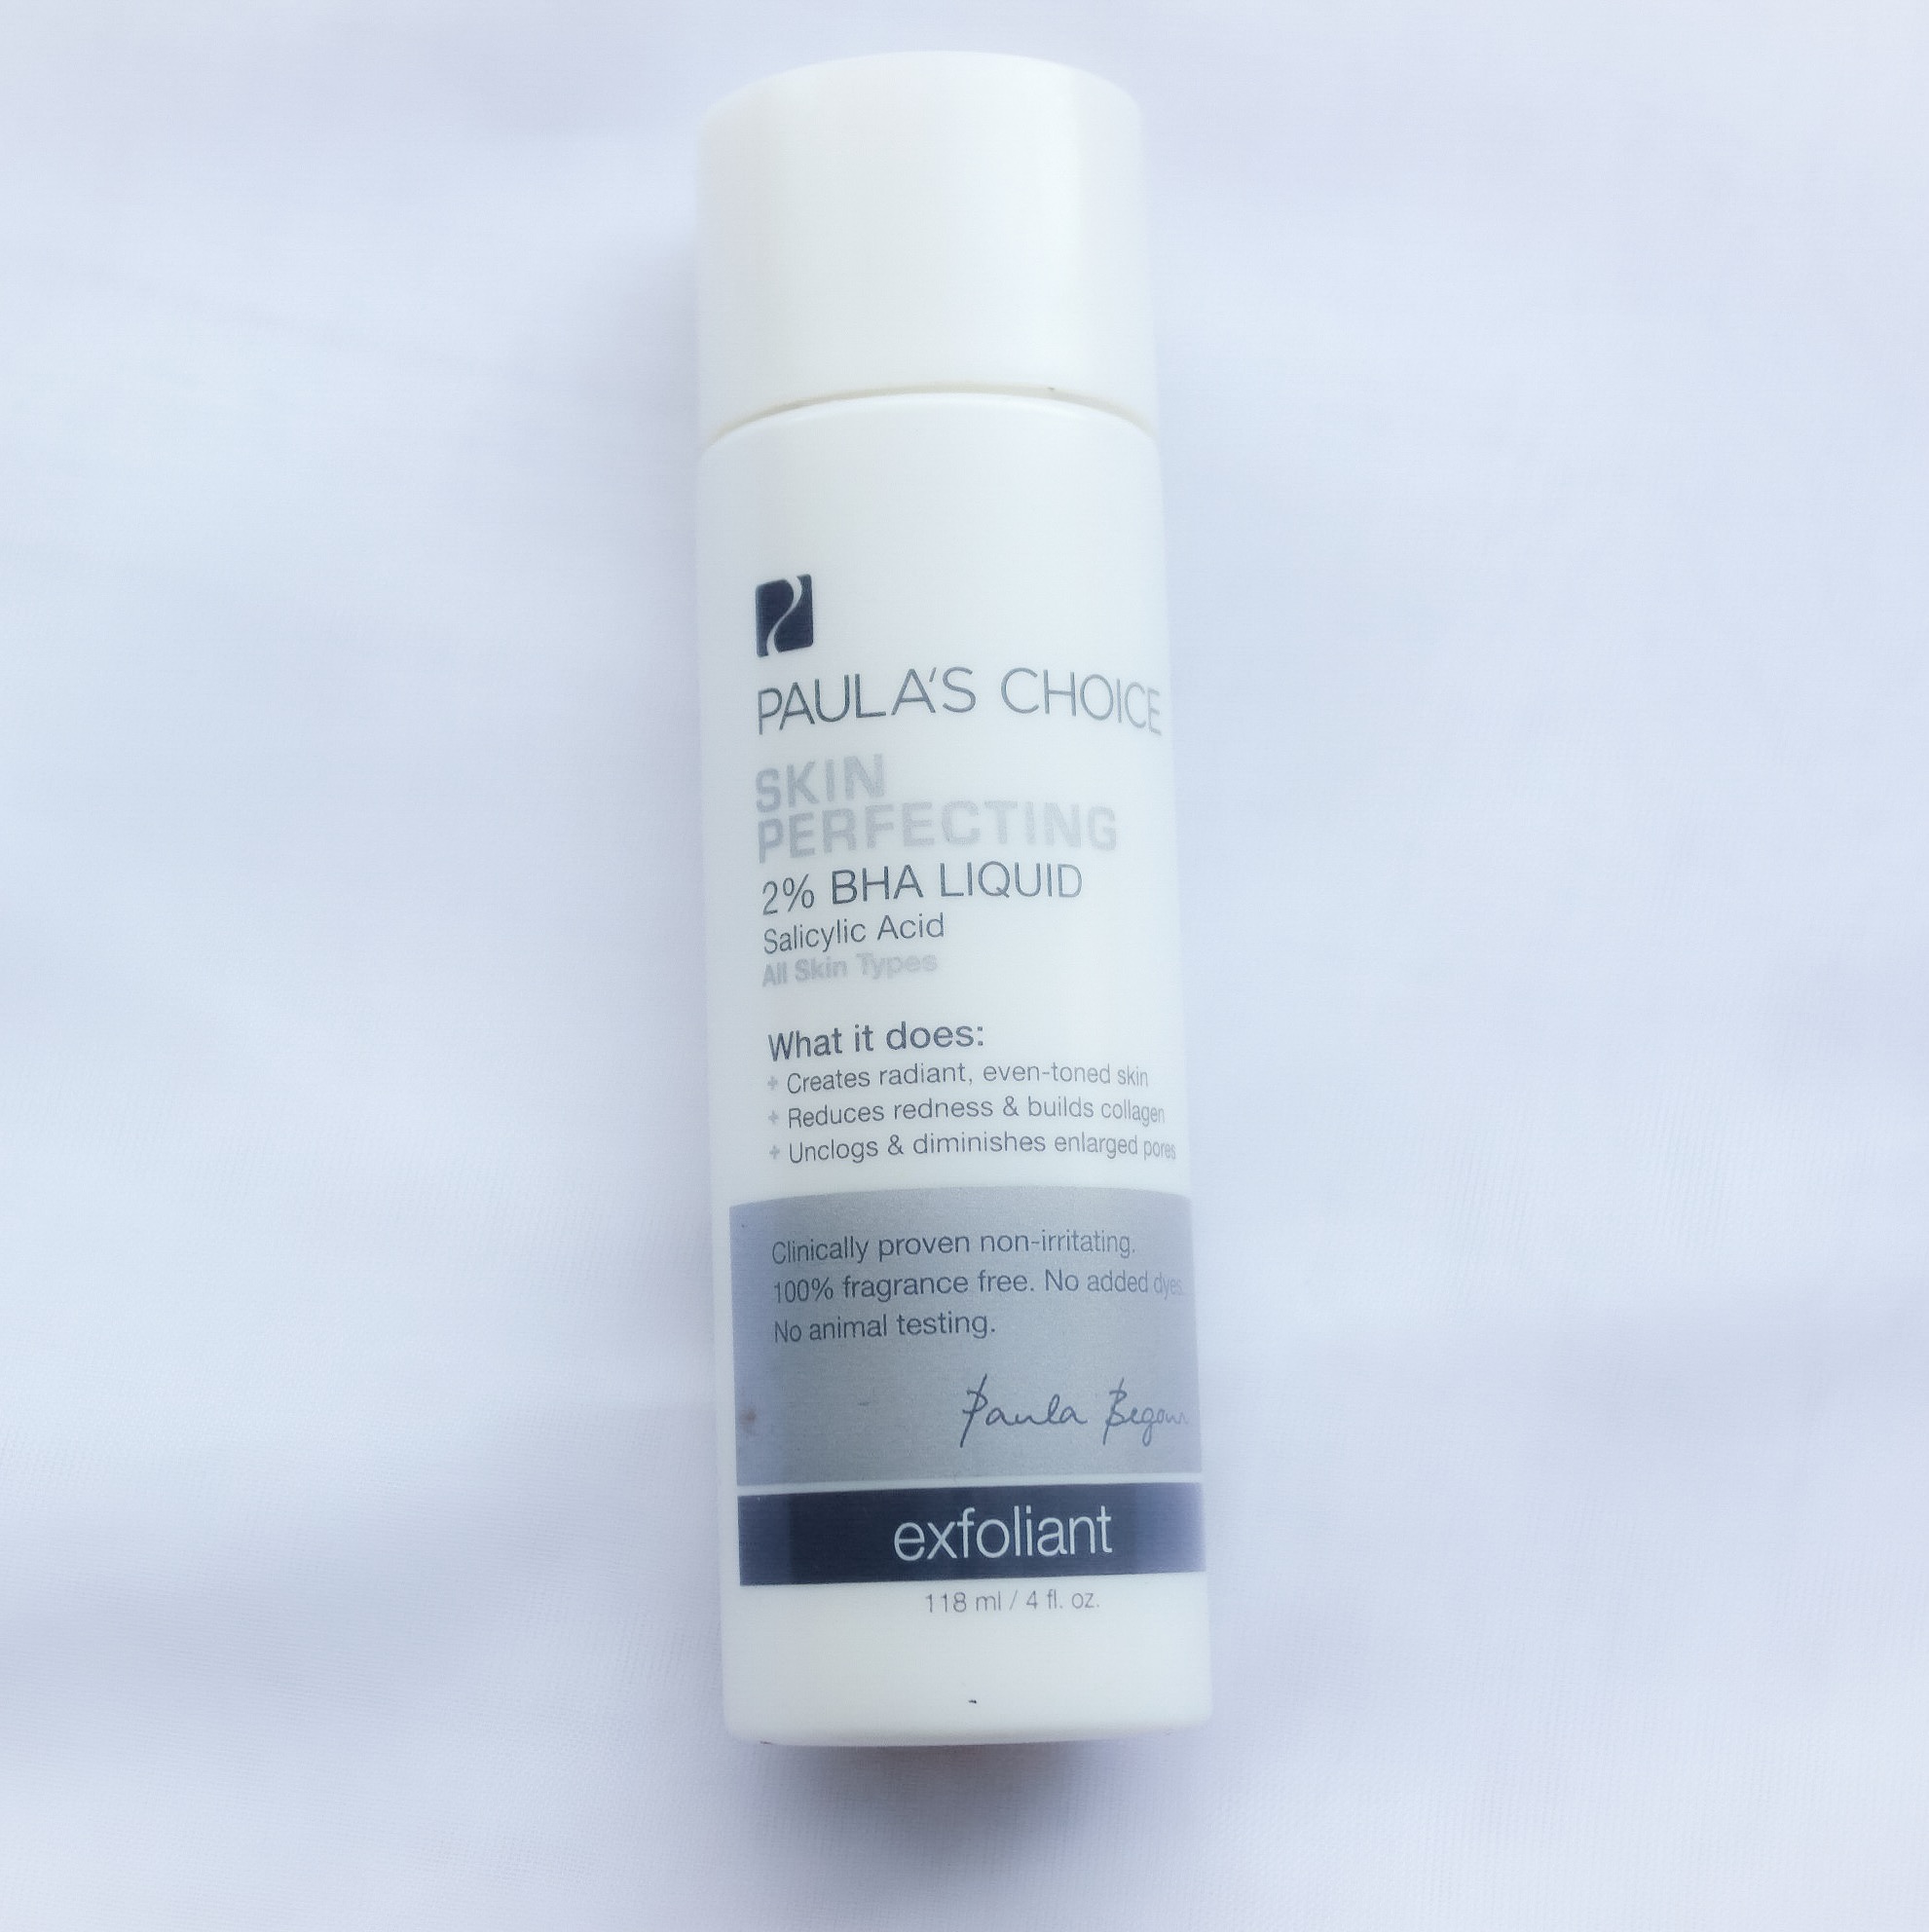 Product that DIMINISHED My Acne and Clogged + Enlarged Pores